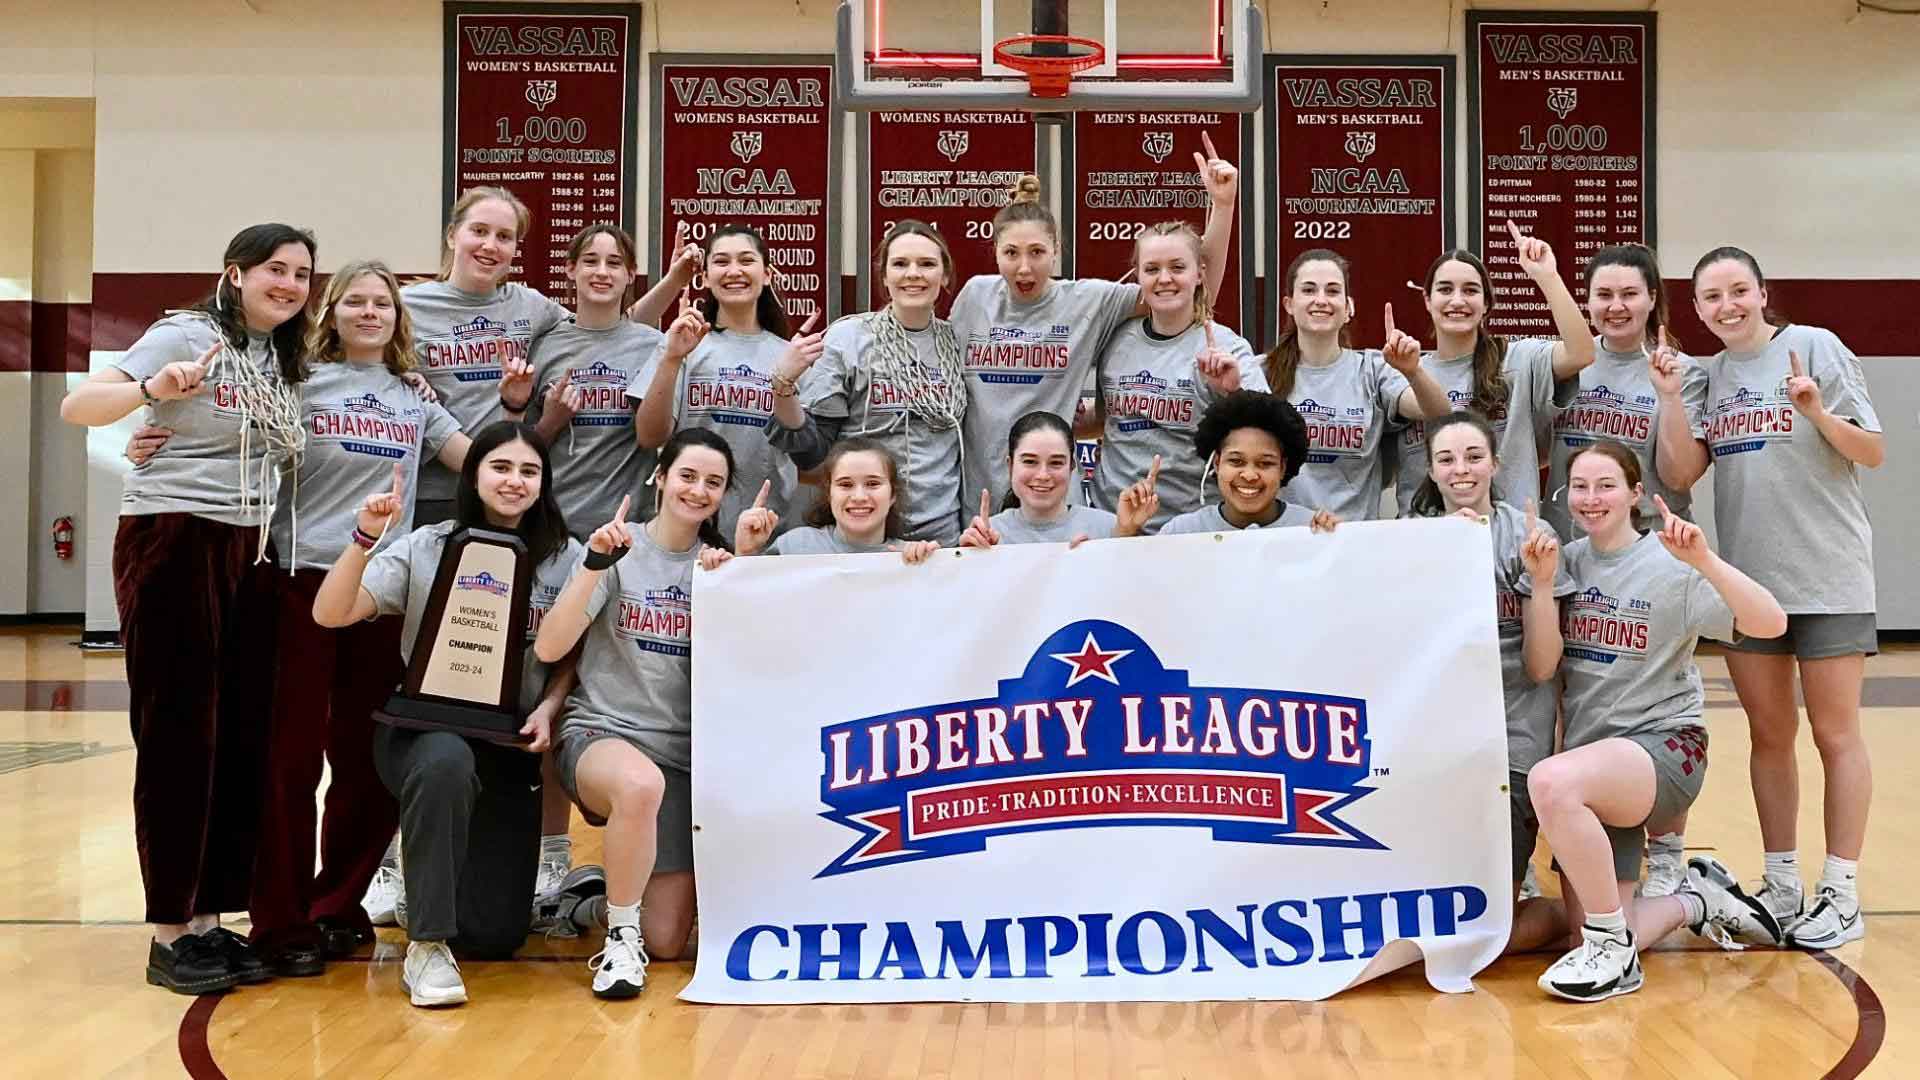 Baskeball team smiling and holding up a Liberty League Championship banner.